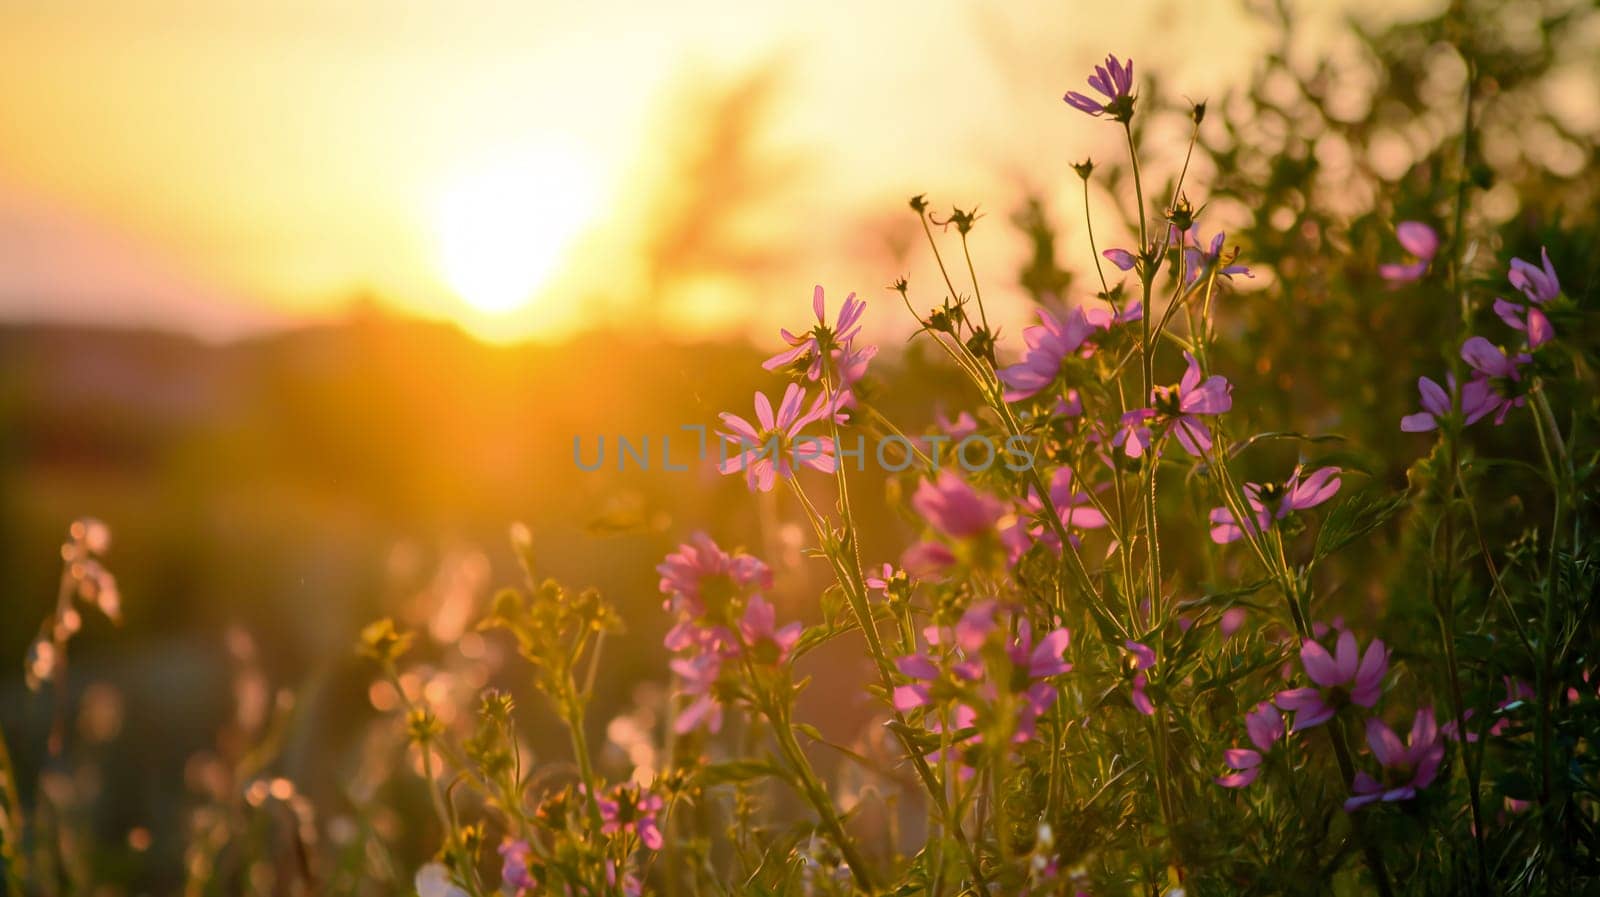 Wildflowers at Sunset in Countryside Field by chrisroll